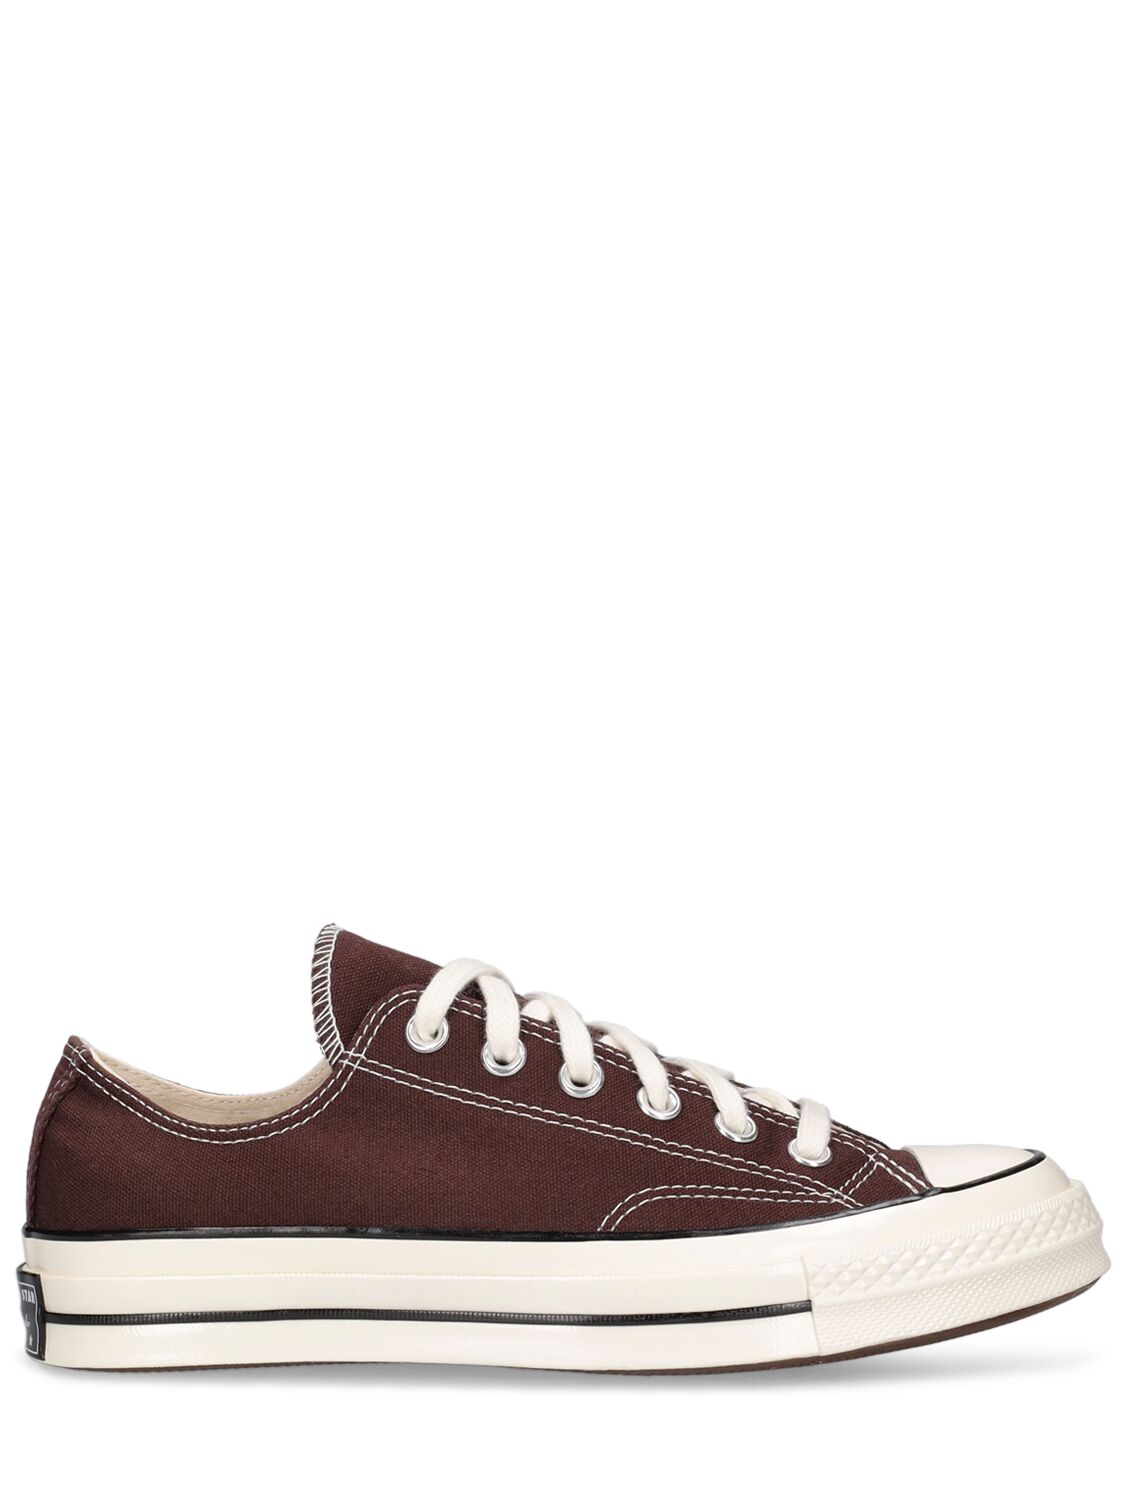 CONVERSE CHUCK 70 LOW SNEAKERS